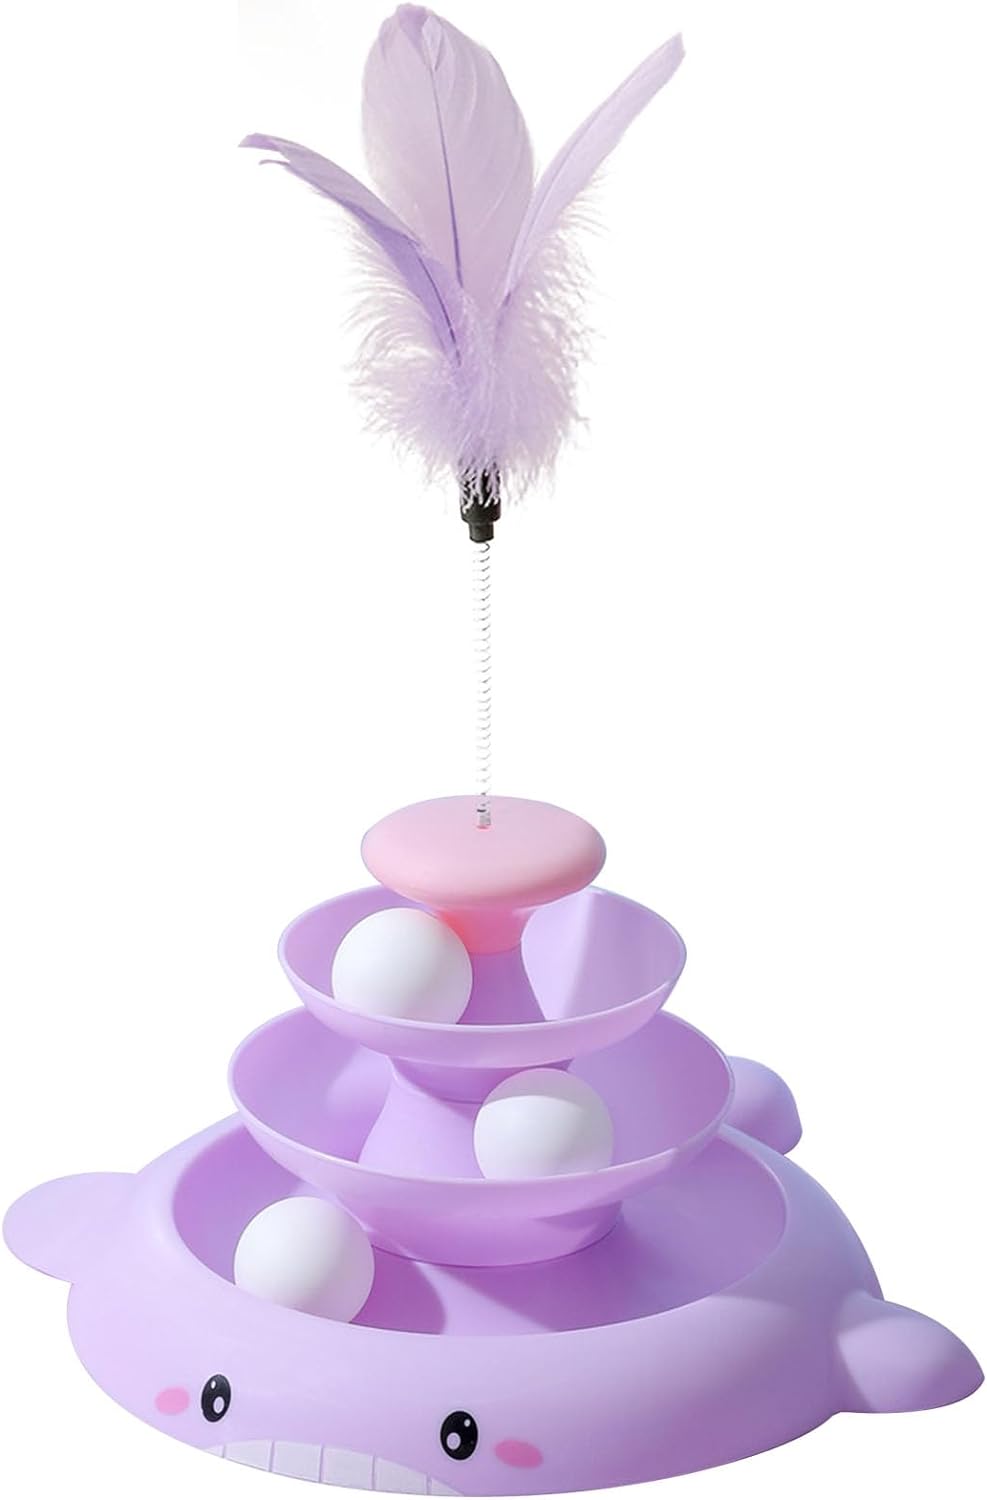 Four-Layer Space Tower With Feather Teaser Wand Kitten & Cat Toy pets-park-pk